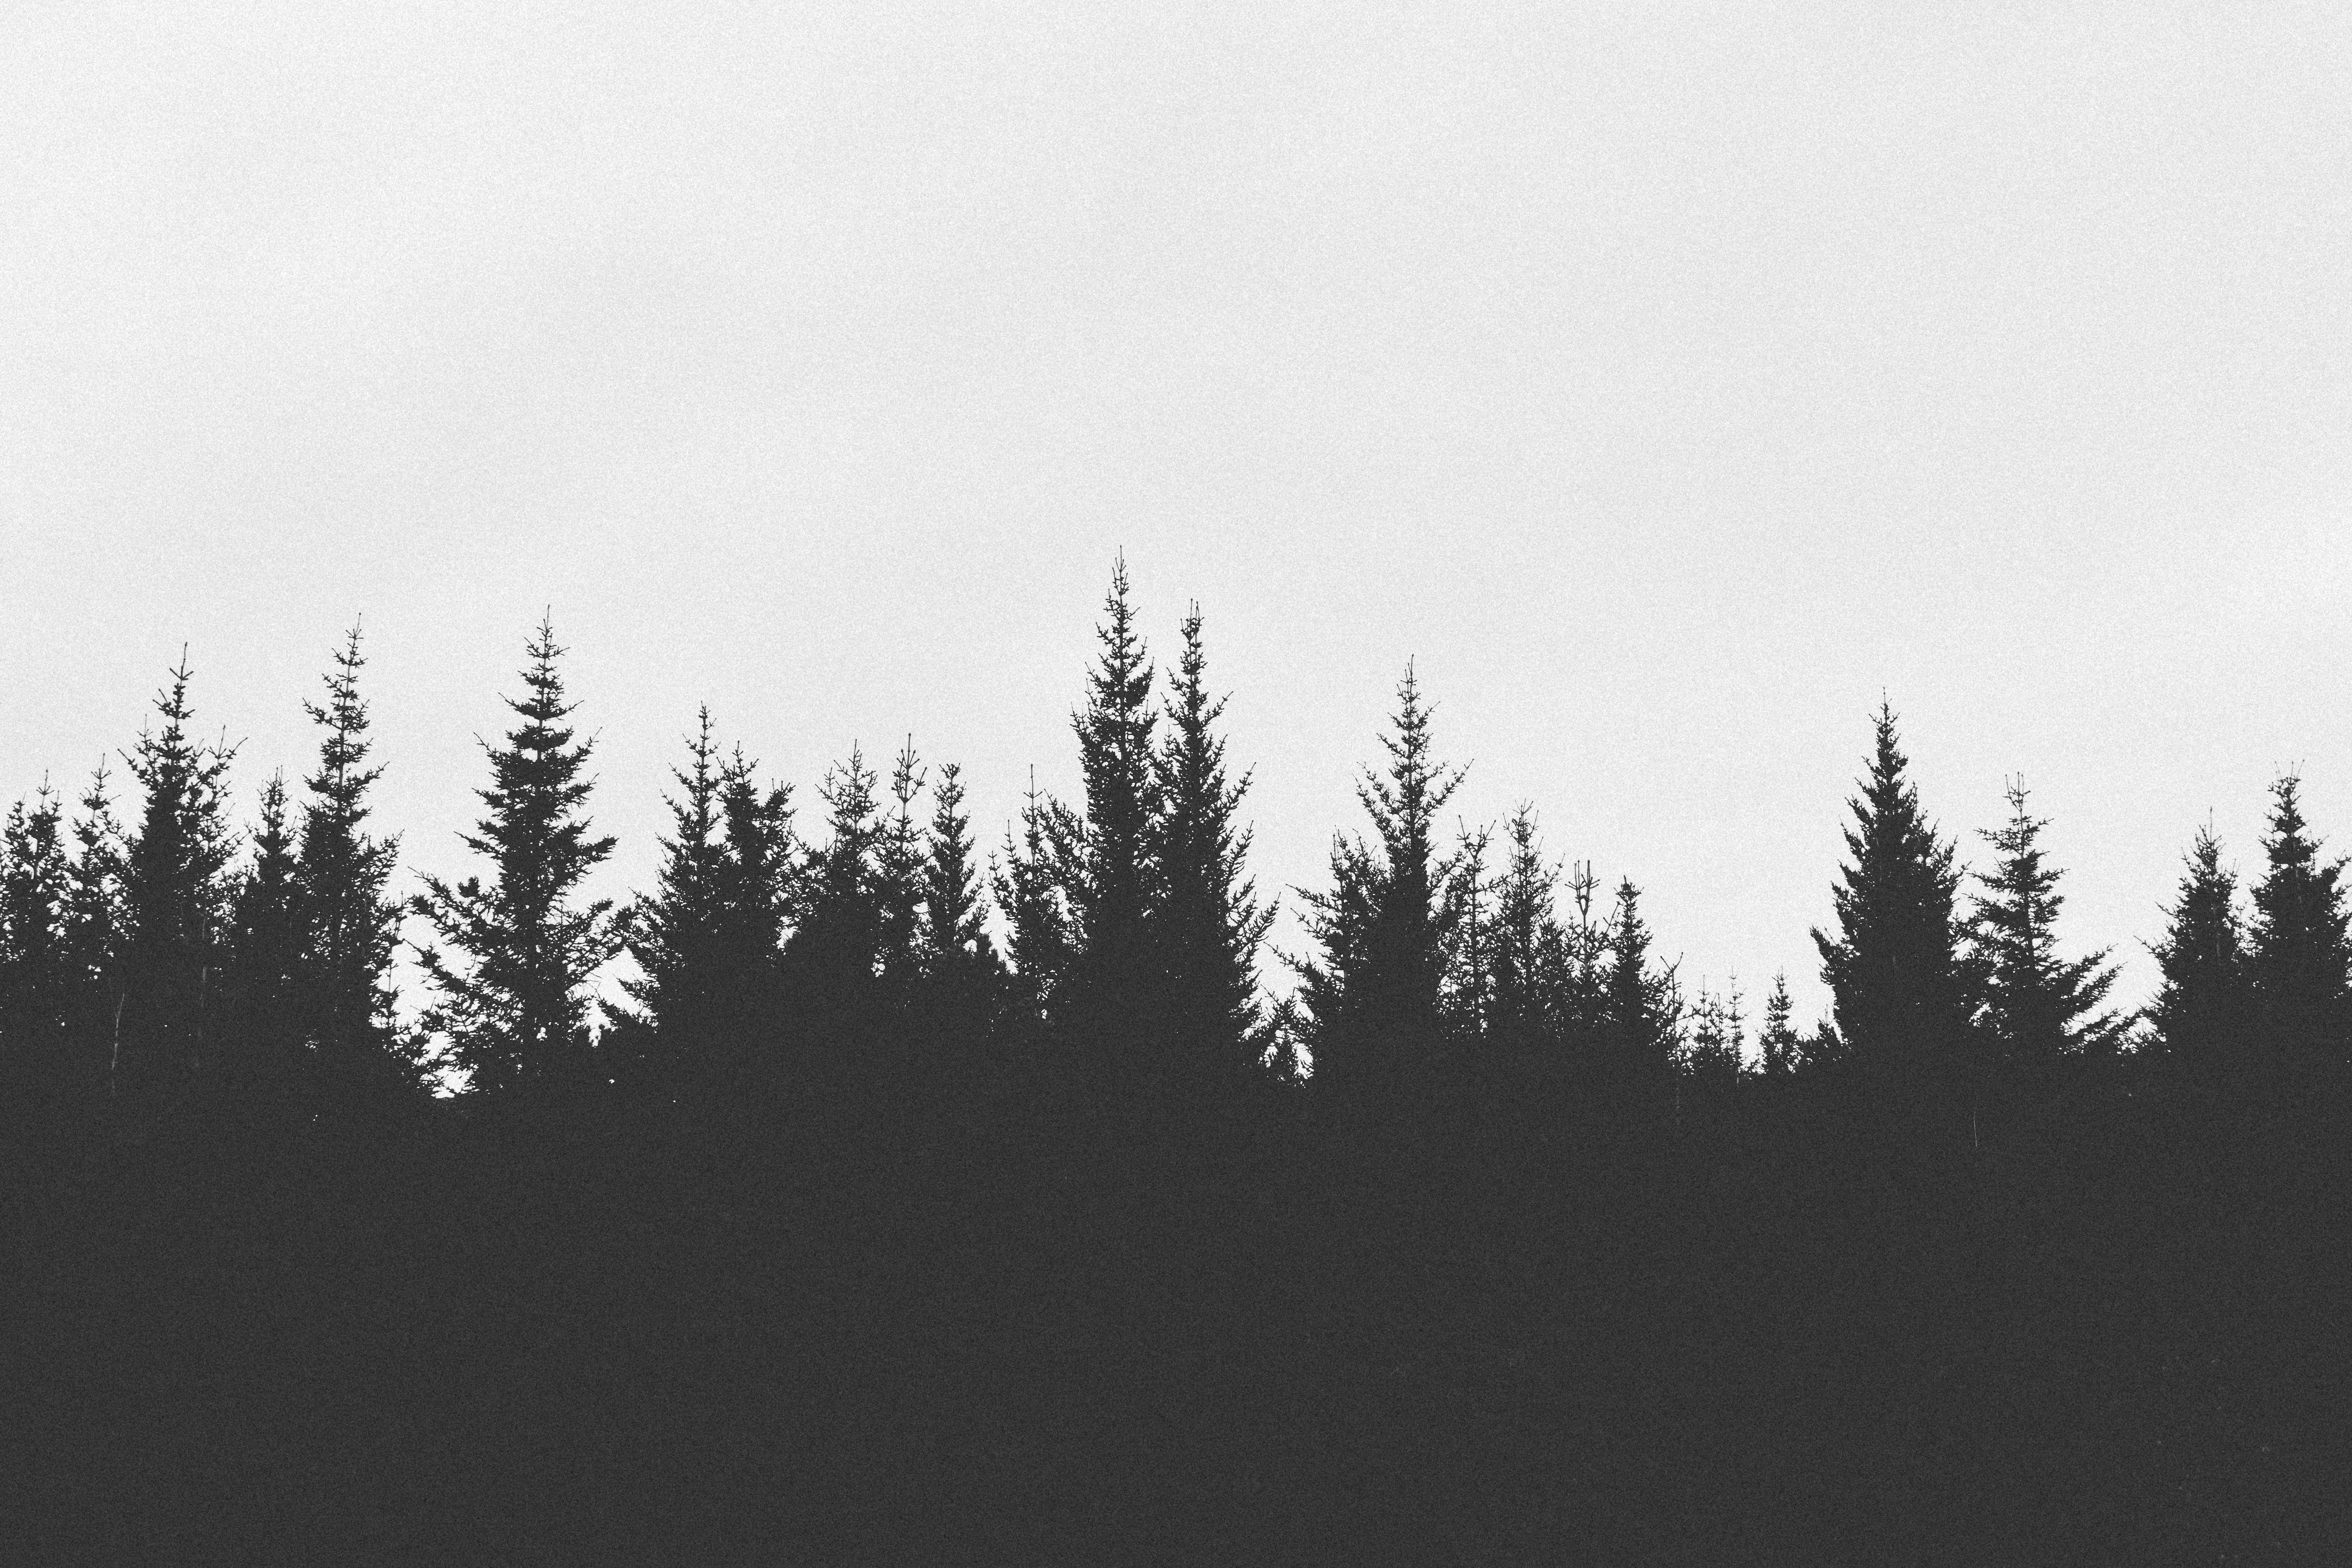 Download Free photo: Silhouette Of Forest - Backlit, Conifer ...